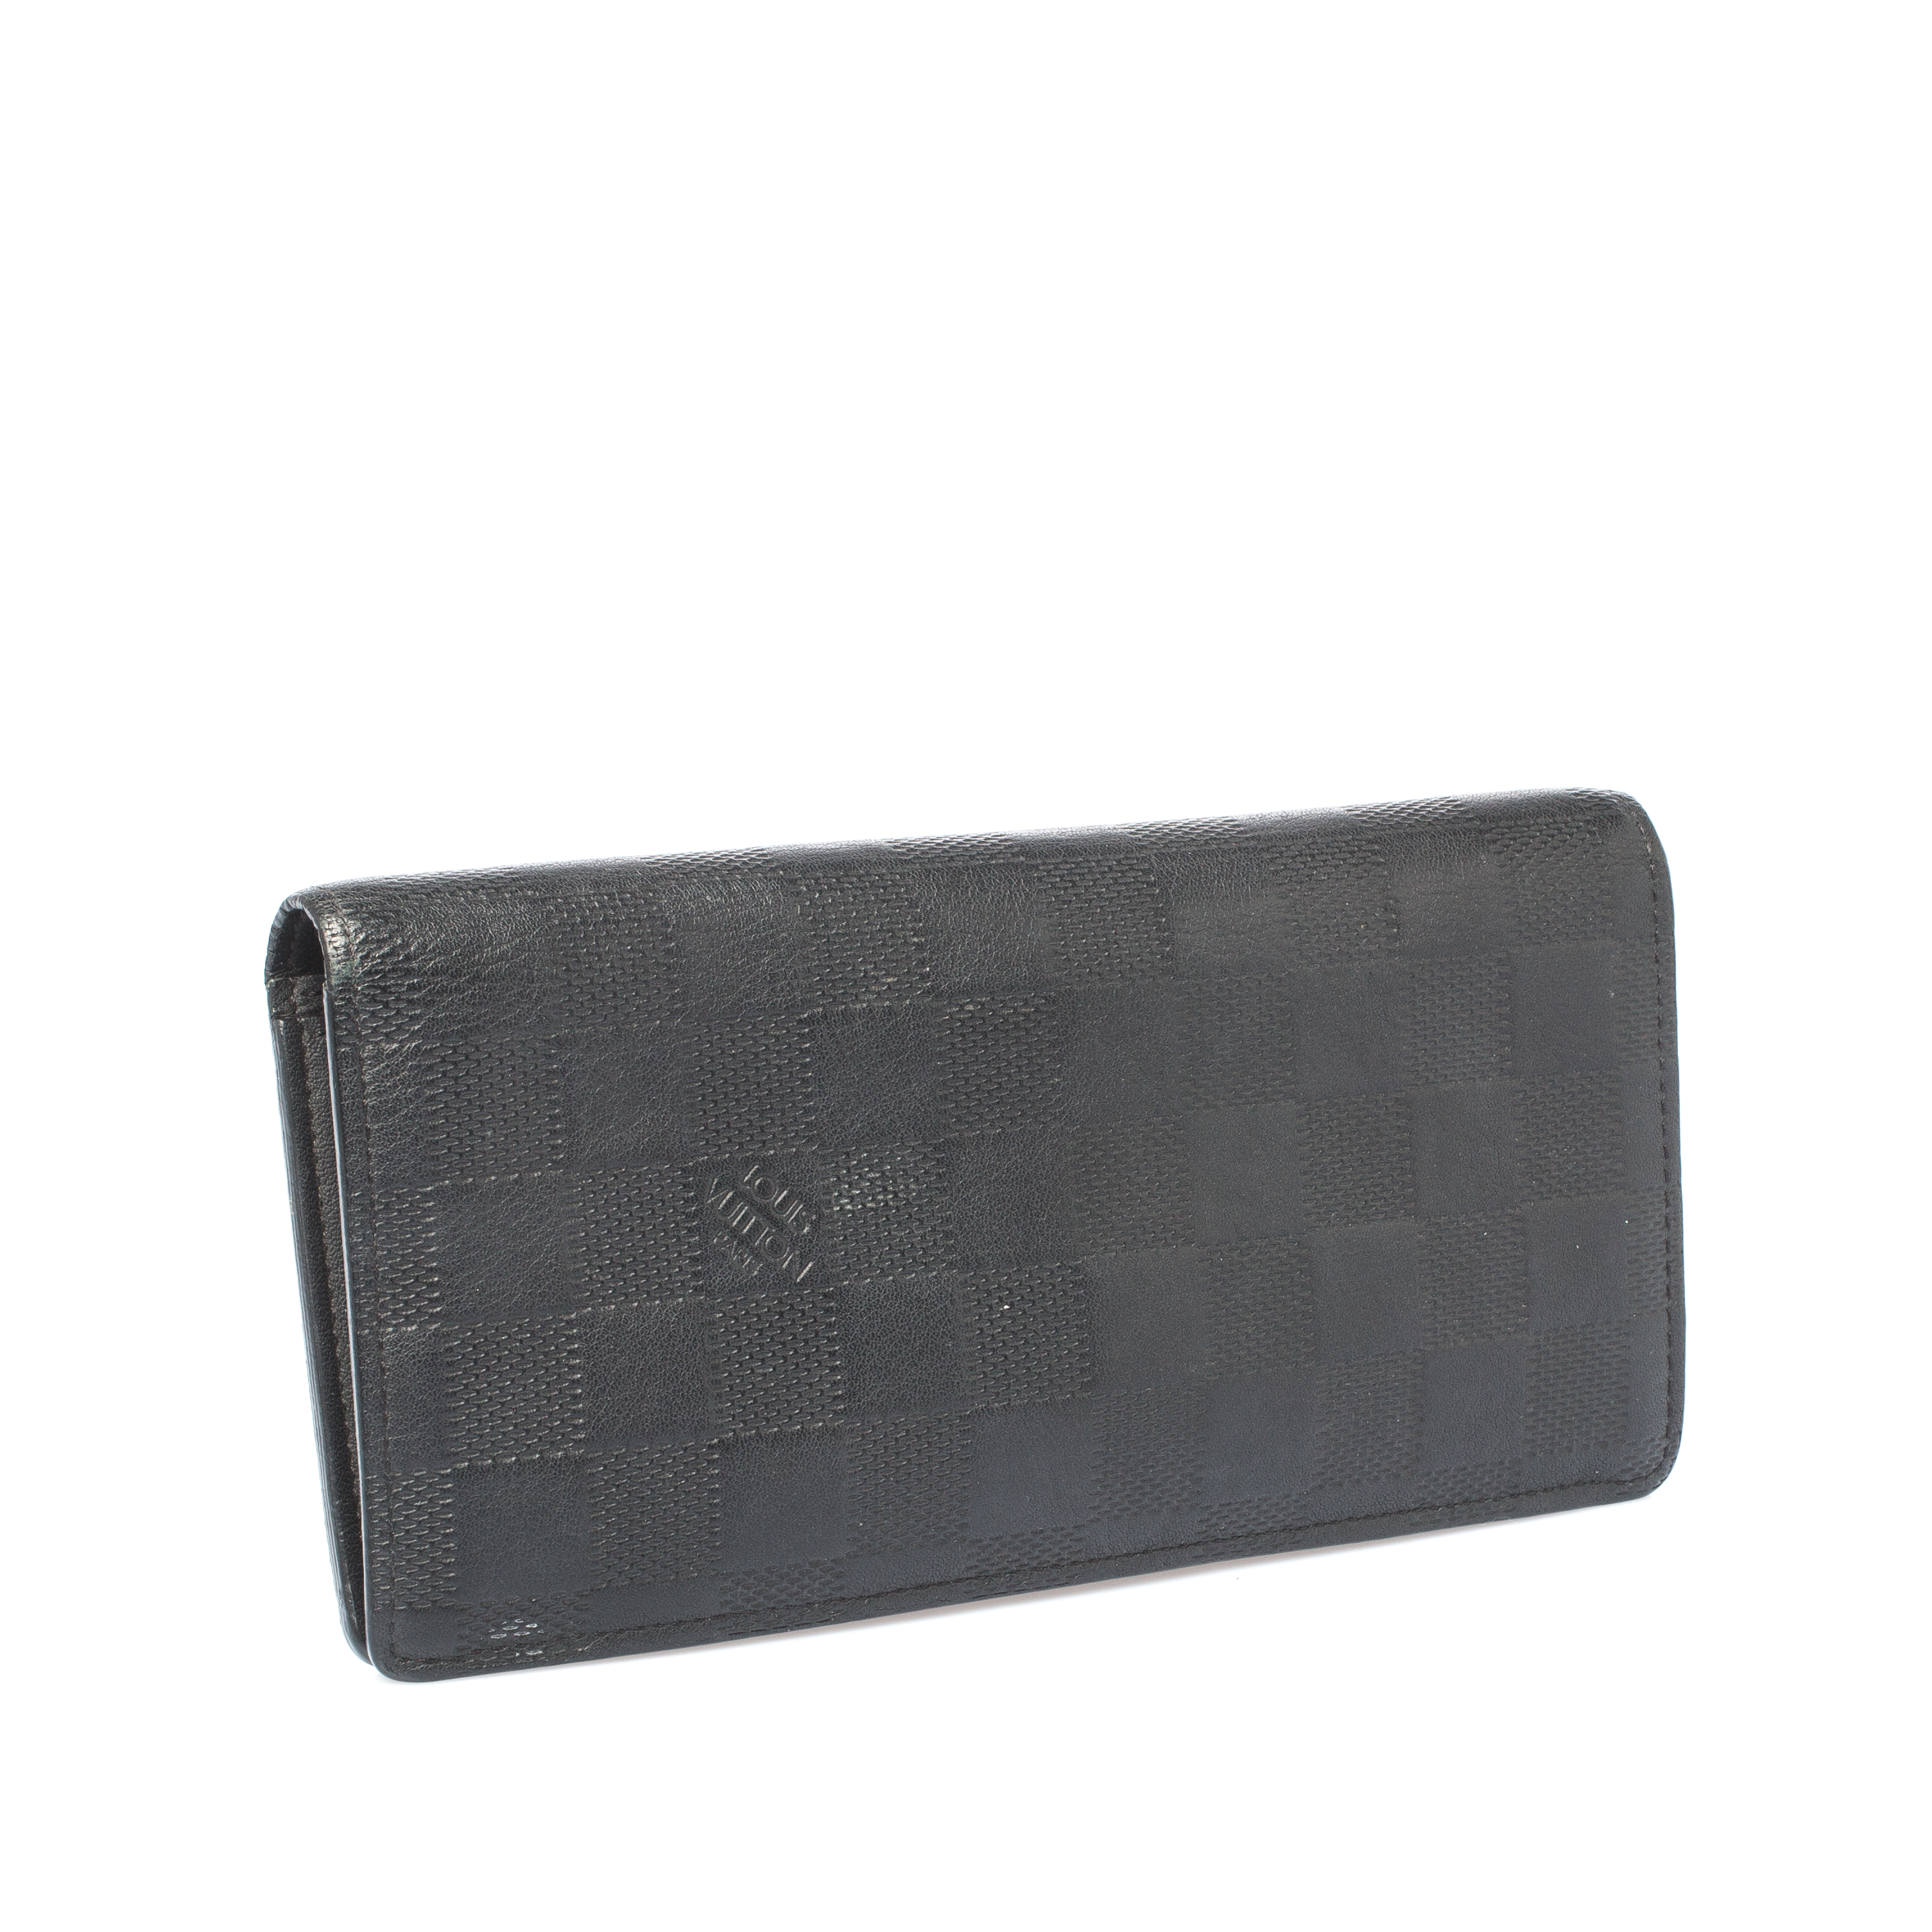 Sold Used LV Brazza Long Wallet Damier Infini Leather